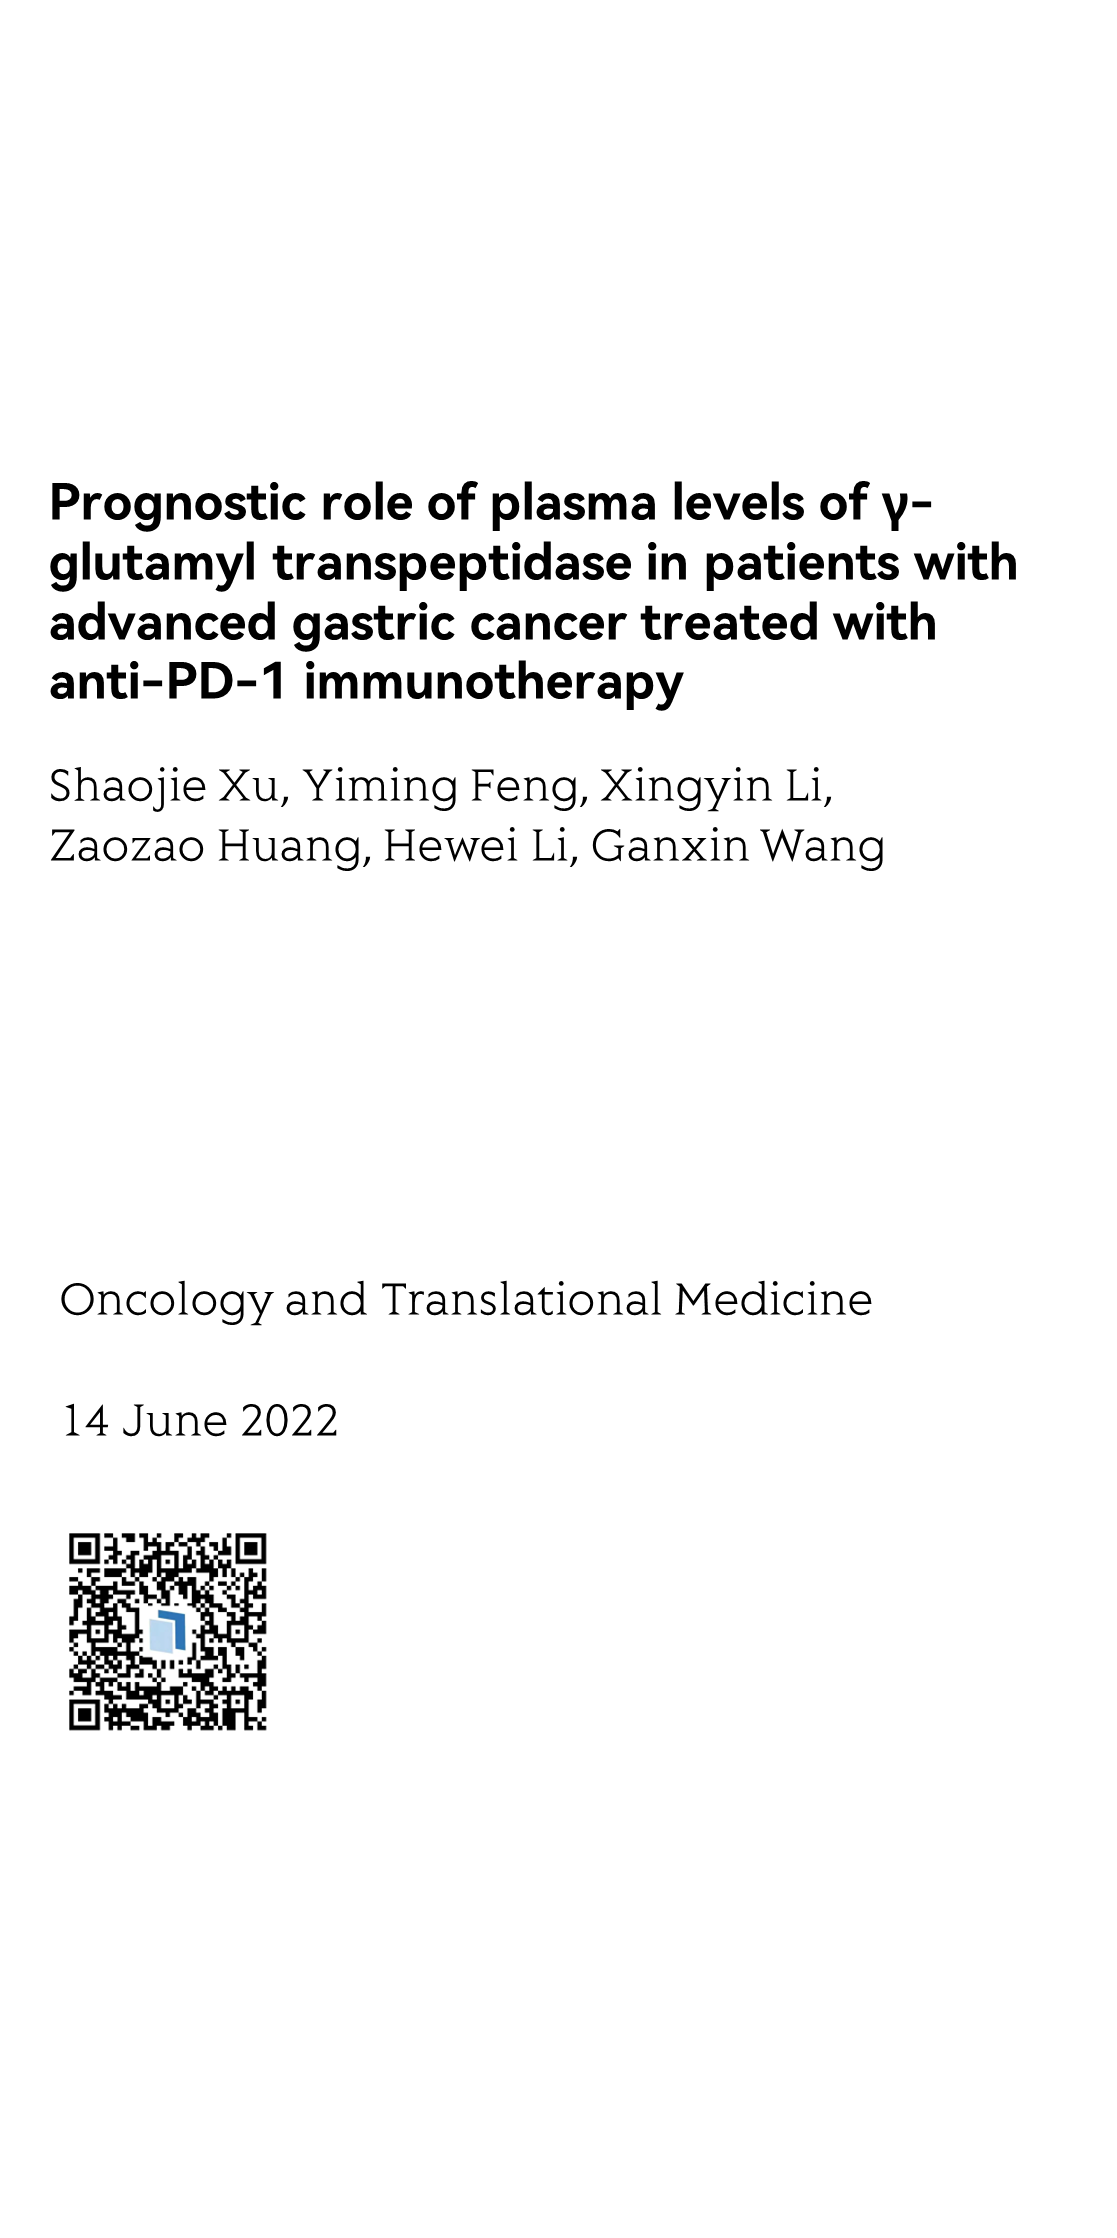 Prognostic role of plasma levels of γ-glutamyl transpeptidase in patients with advanced gastric cancer treated with anti-PD-1 immunotherapy_1